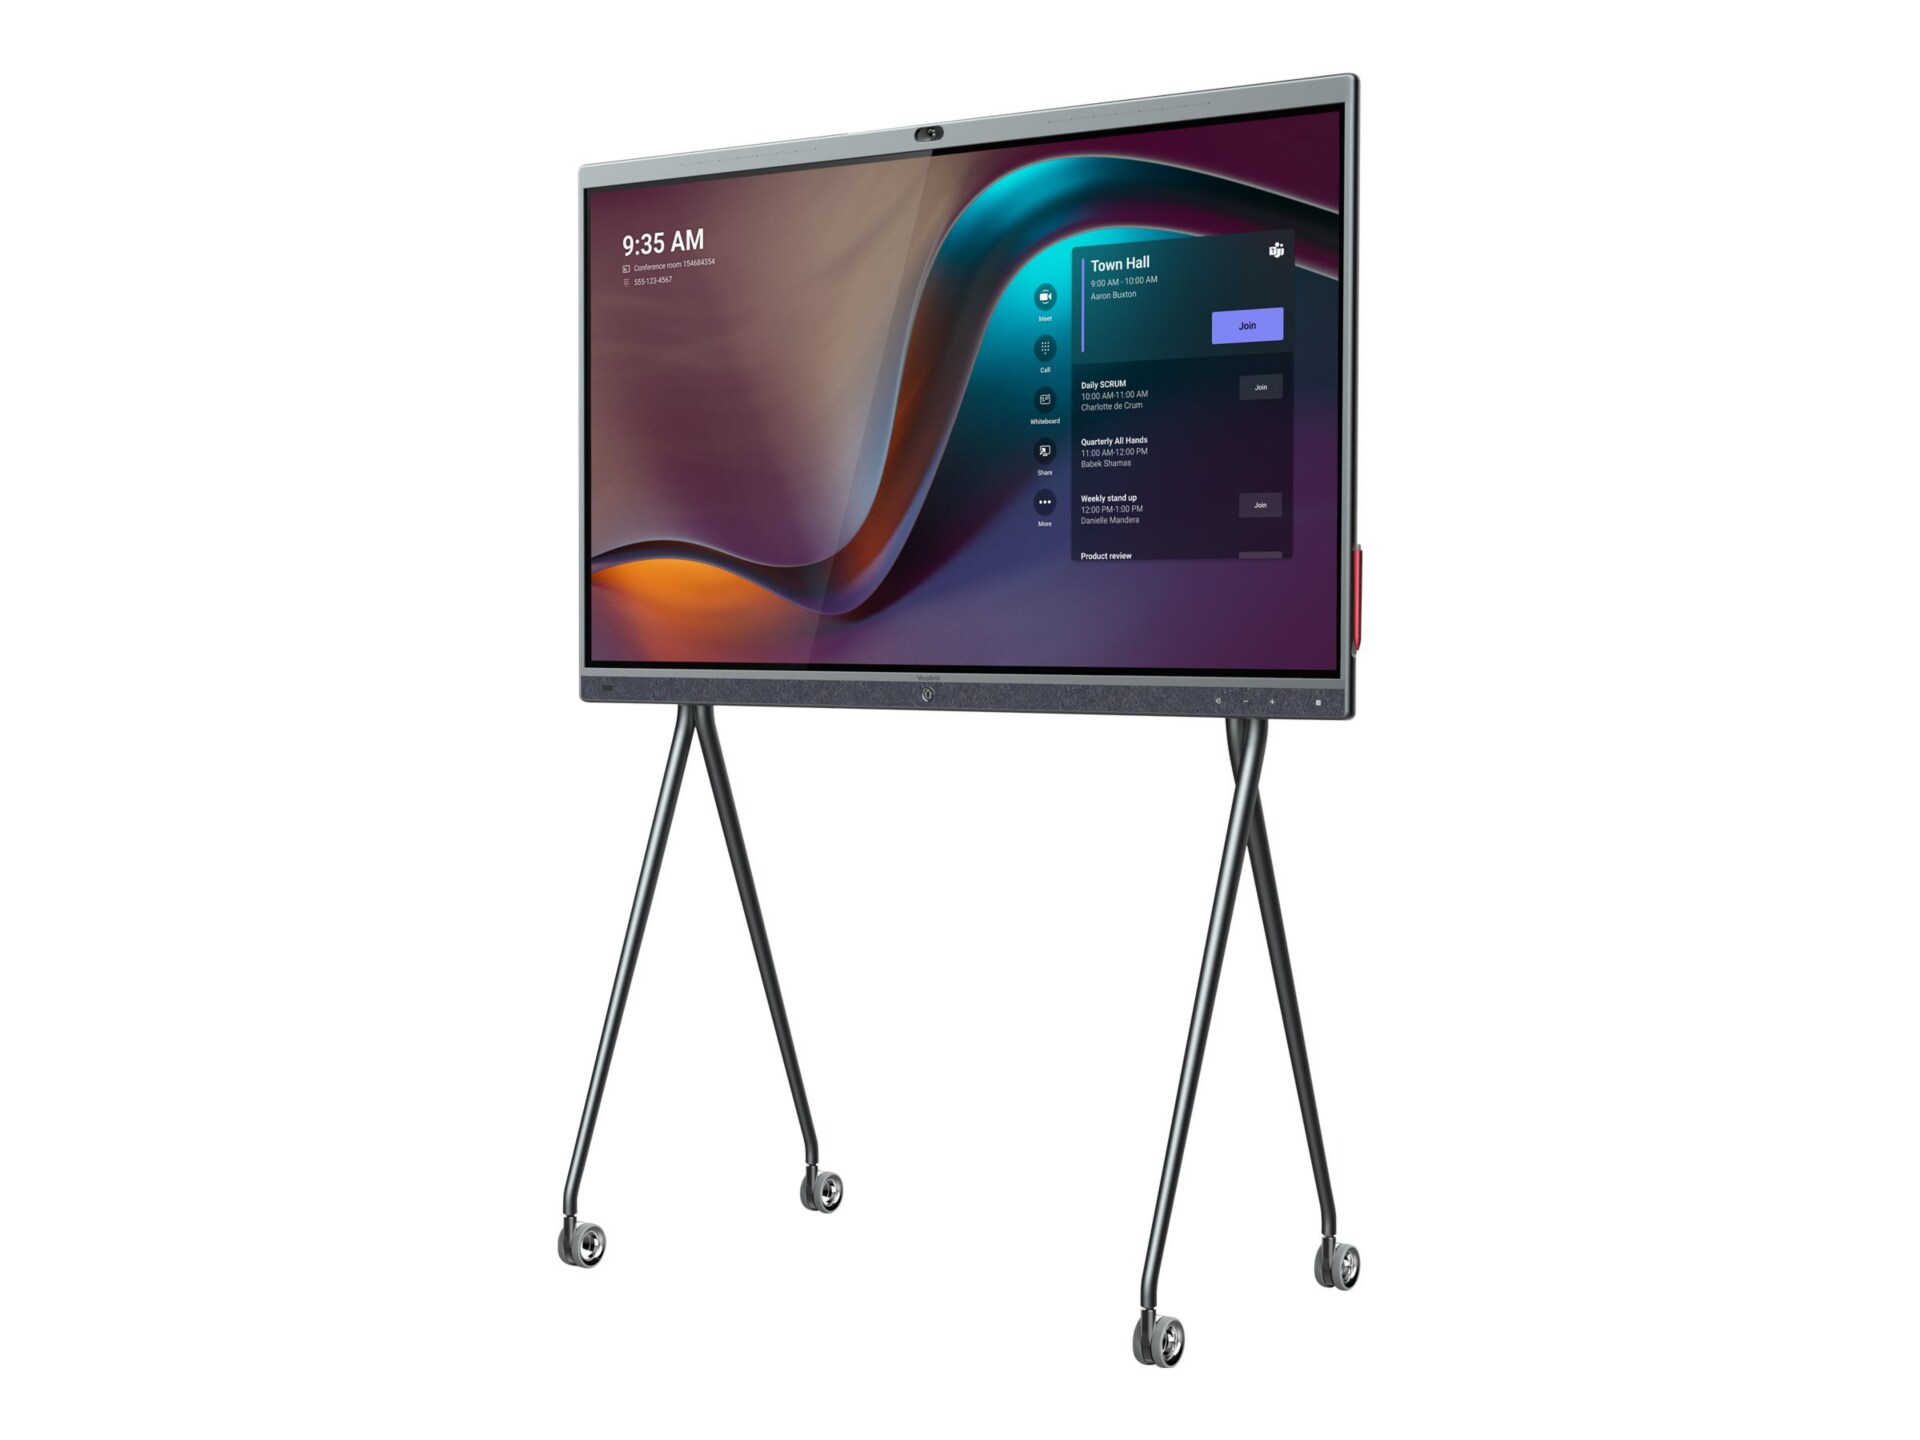 Yealink MeetingBoard 65" LED-backlit LCD display - 4K - for interactive communication